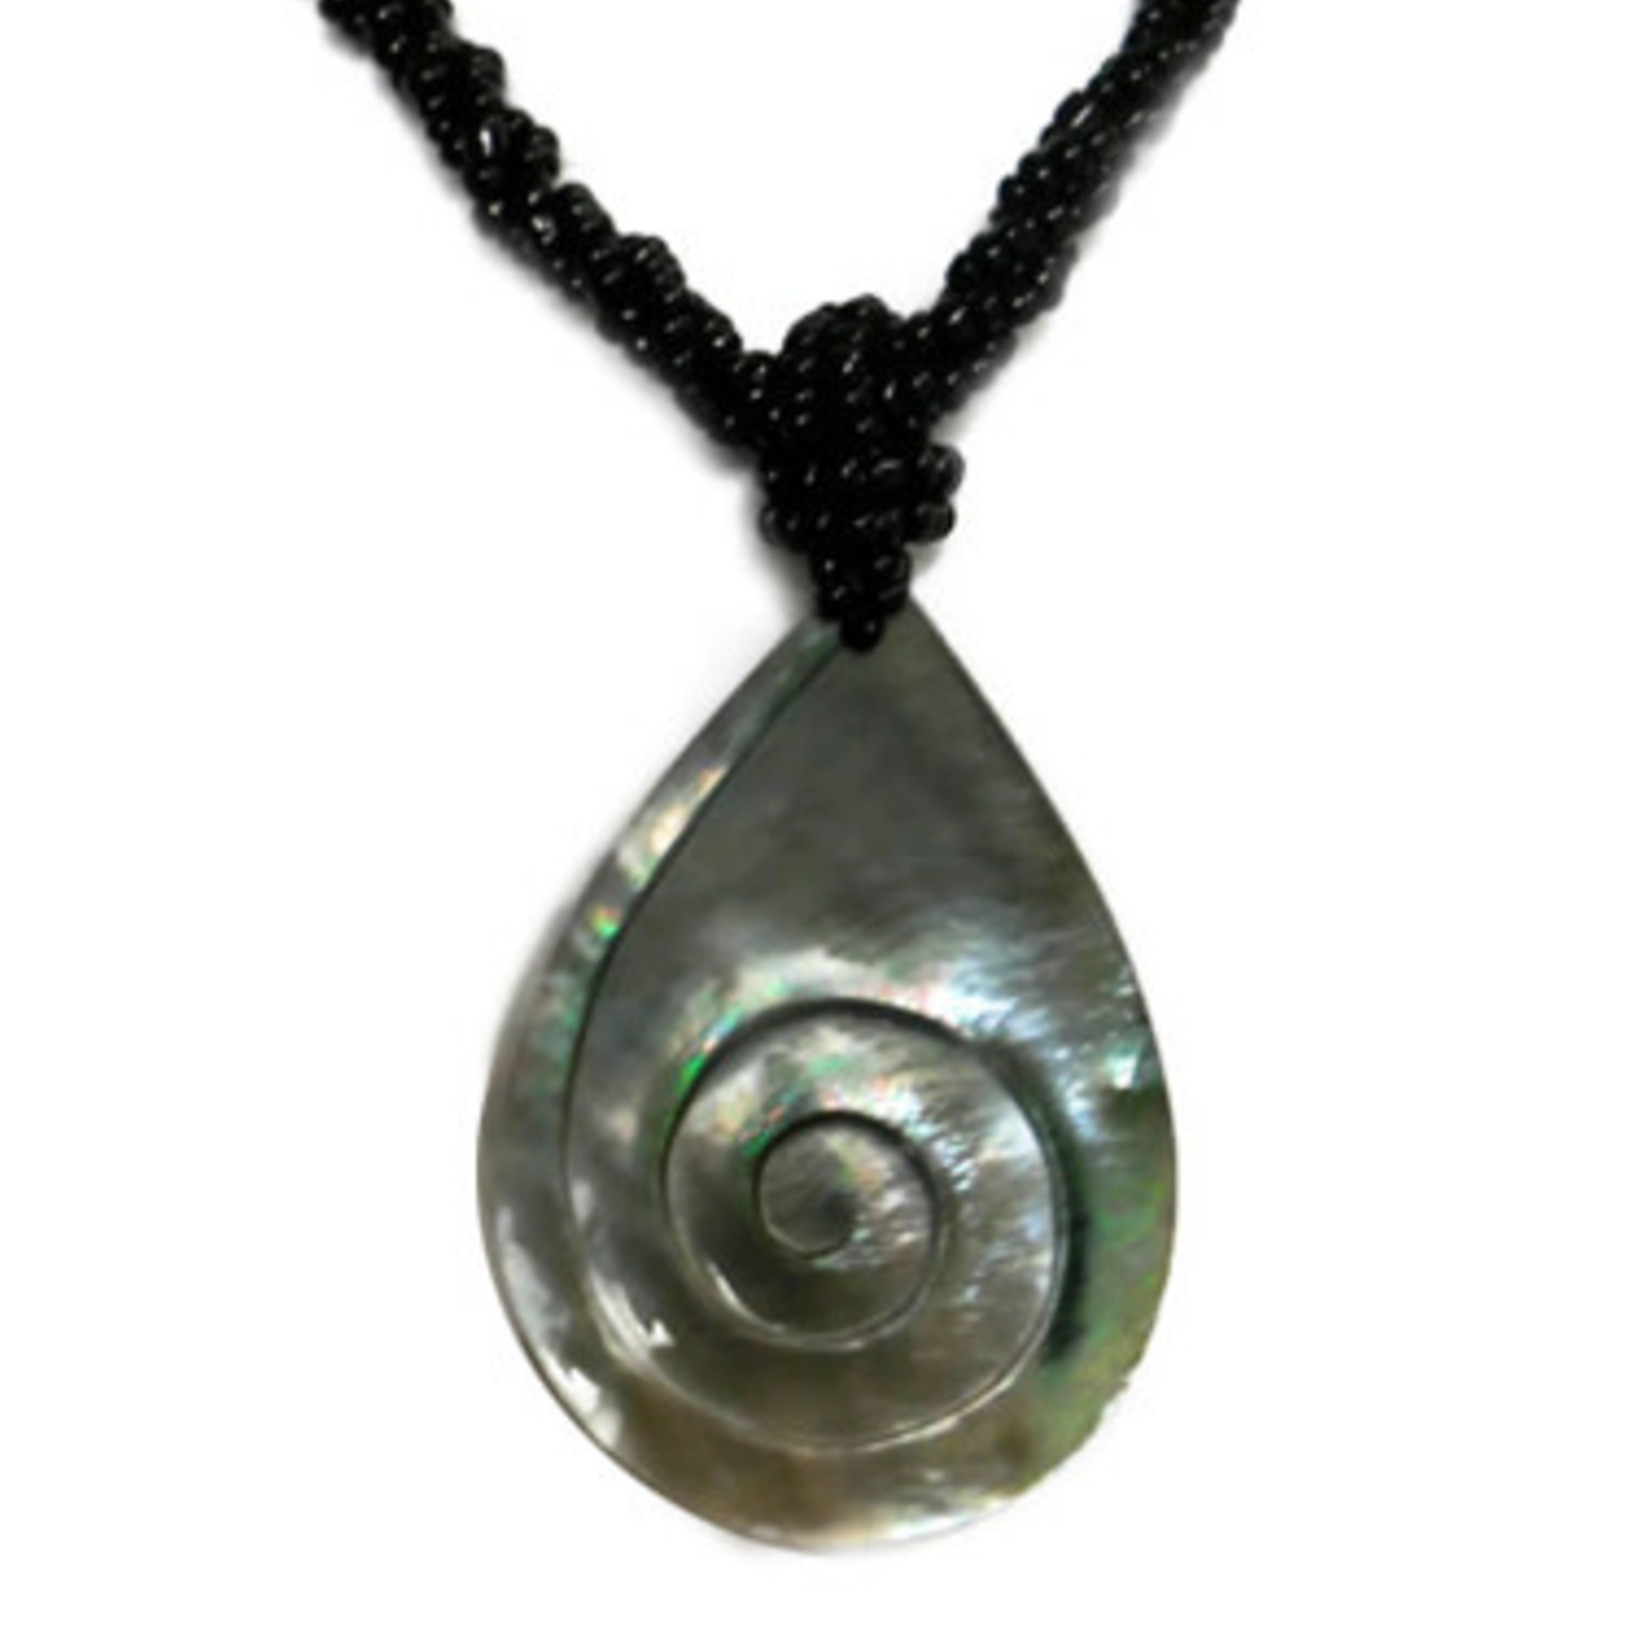 Shell Necklace Carved Teardrop Swirl Design with Black Beads - NB2